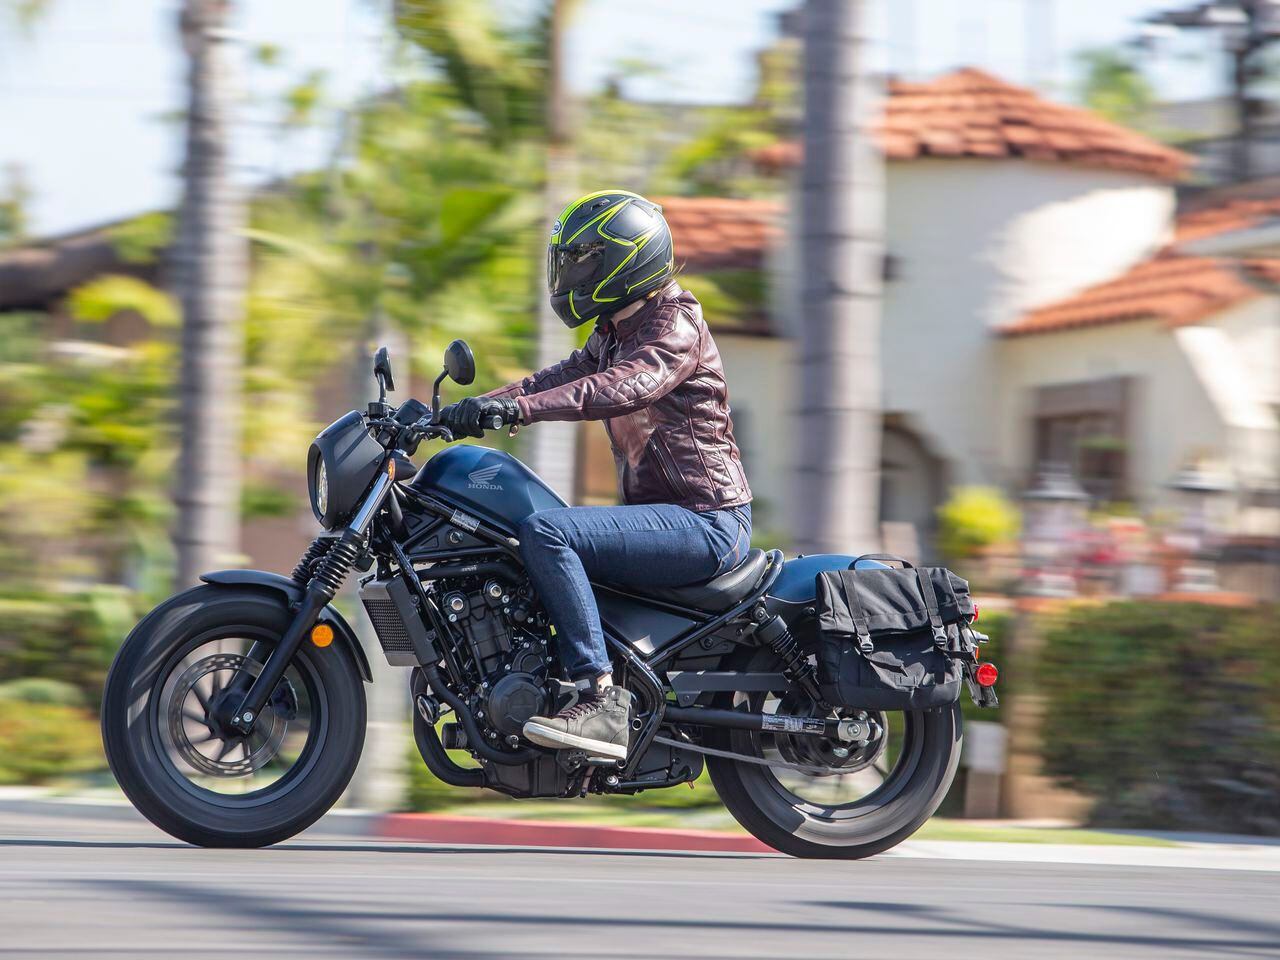 Old reliable. The Honda Rebel maintains its status as a great, likable beginner motorcycle.